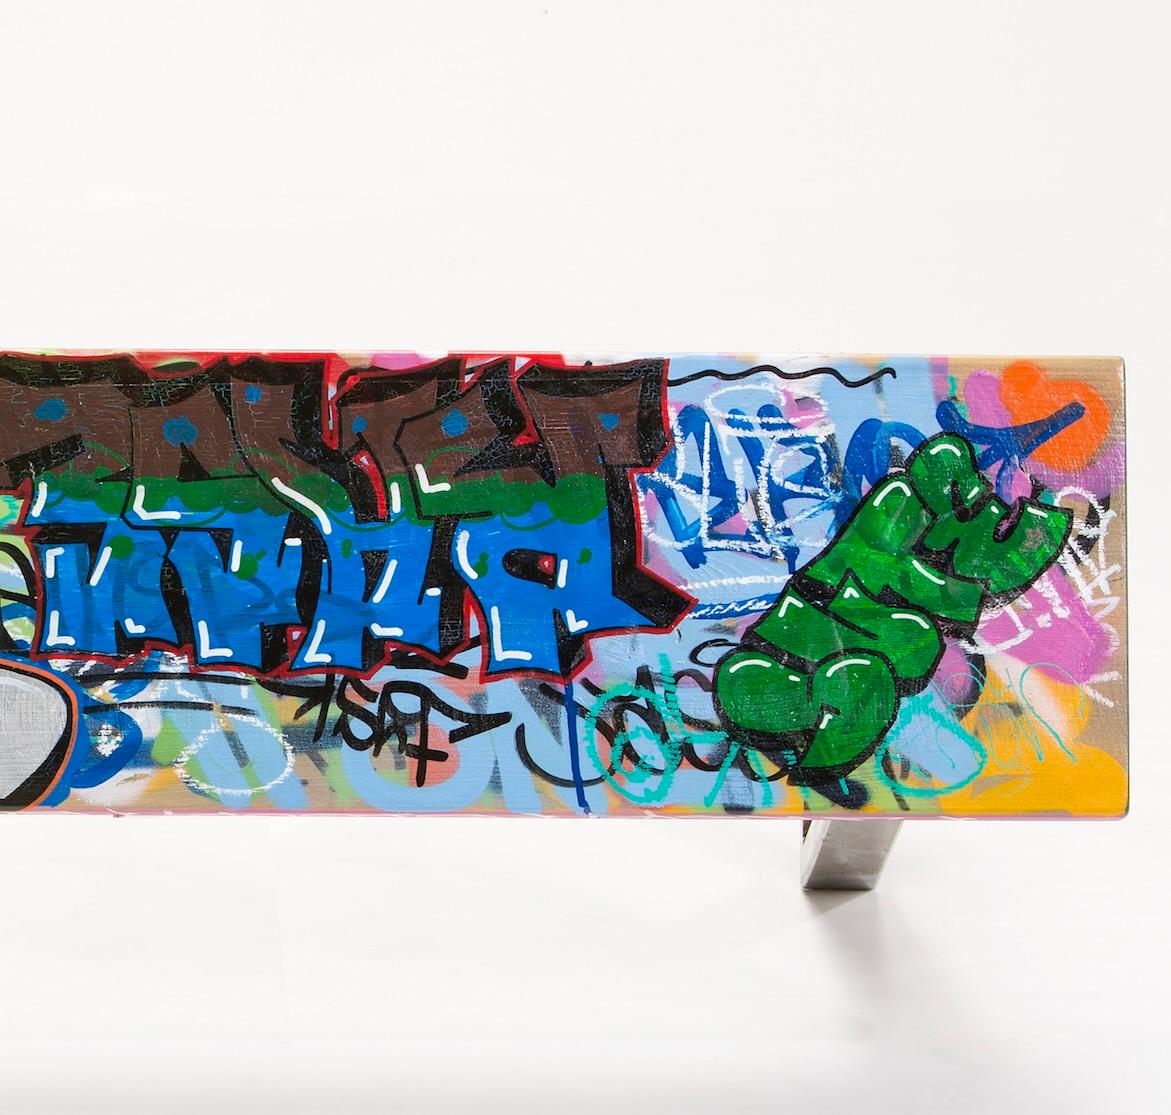 Contemporary Small Colorful Graffiti Tagged Wood Bench 